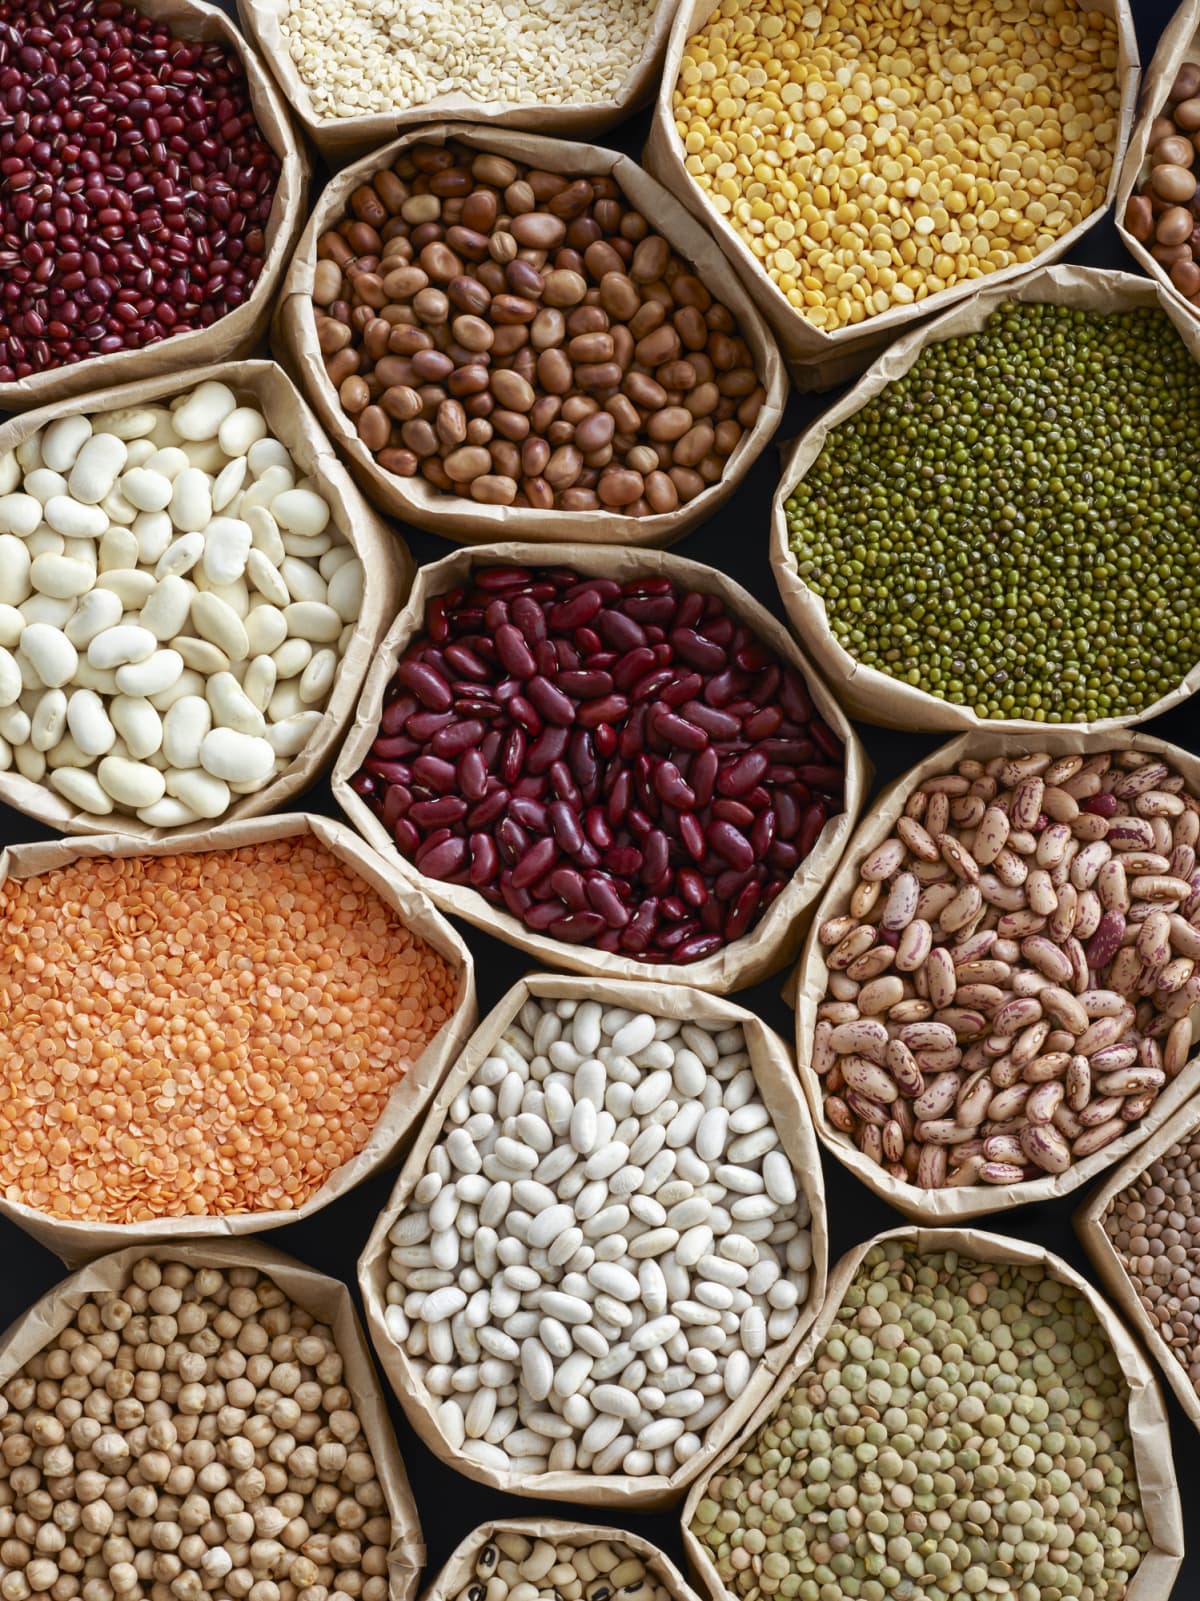 Colorful selection of pulses in paper bags